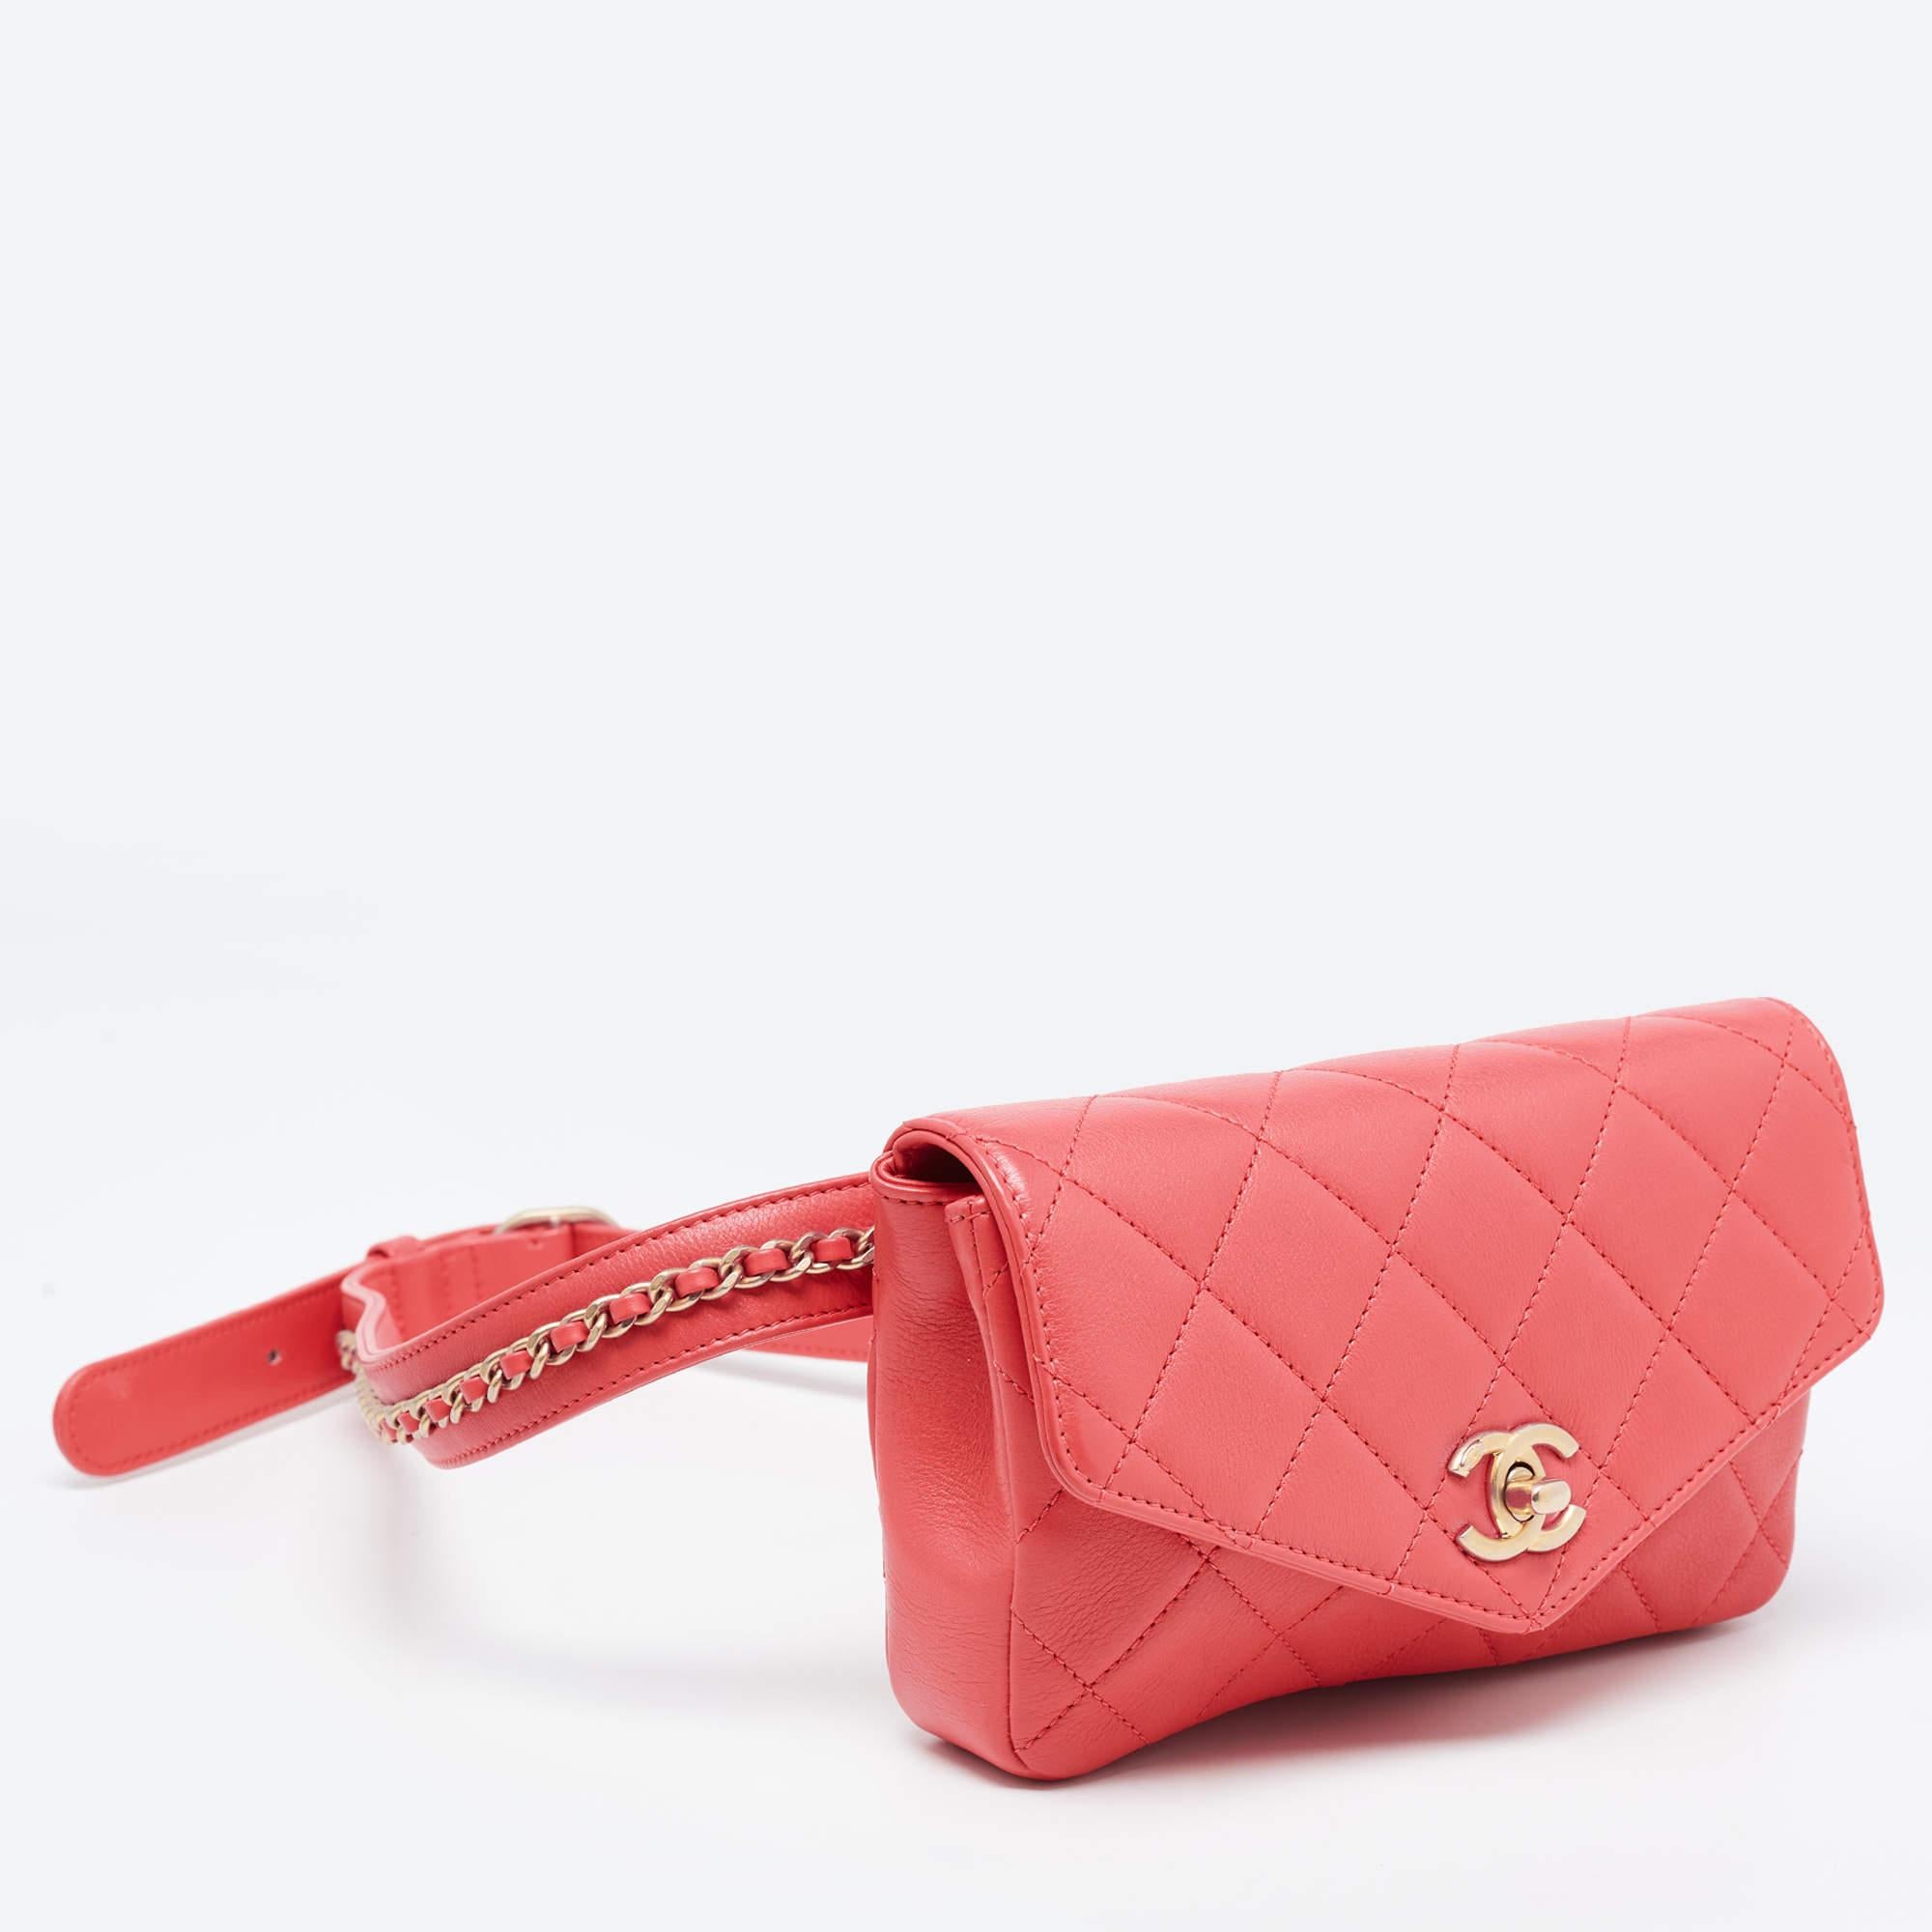 Women's Chanel Orange Quilted Leather Envelope Flap Waist Bag For Sale